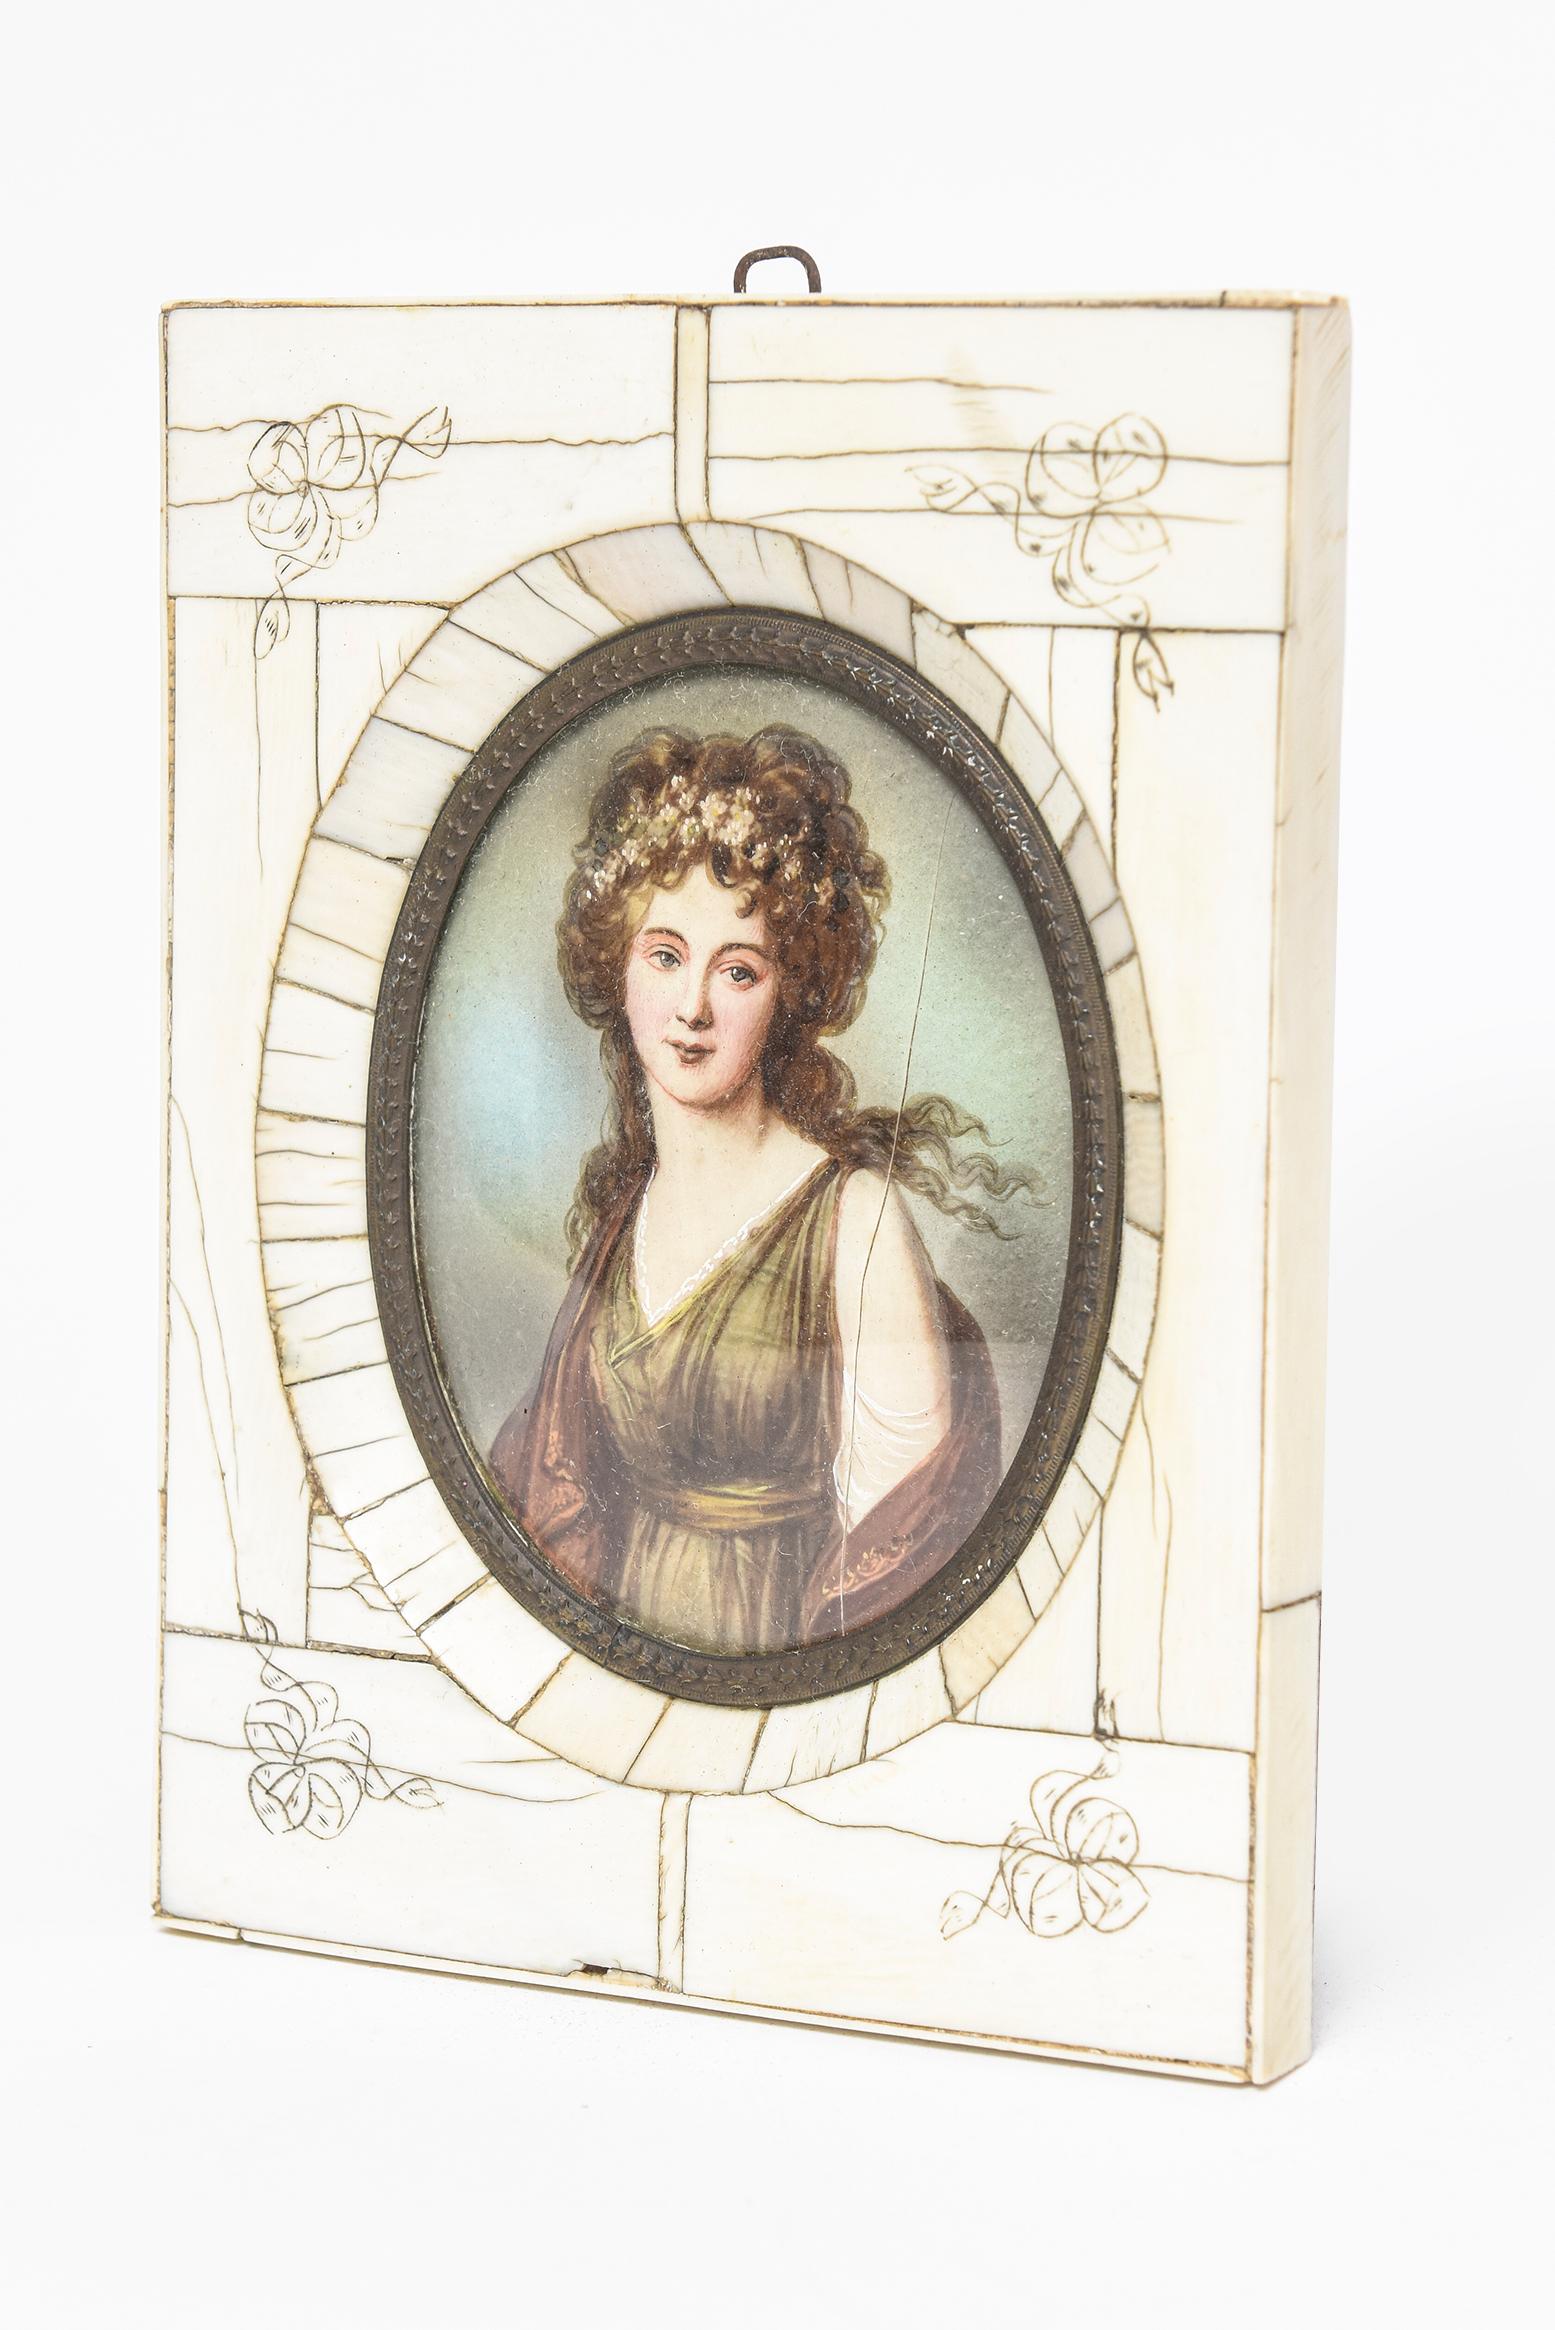 19th century miniature hand-painted portrait of a lady with flowers in her hair presented in an engraved bone rectangular frame with an antique-gilded brass frame.
      